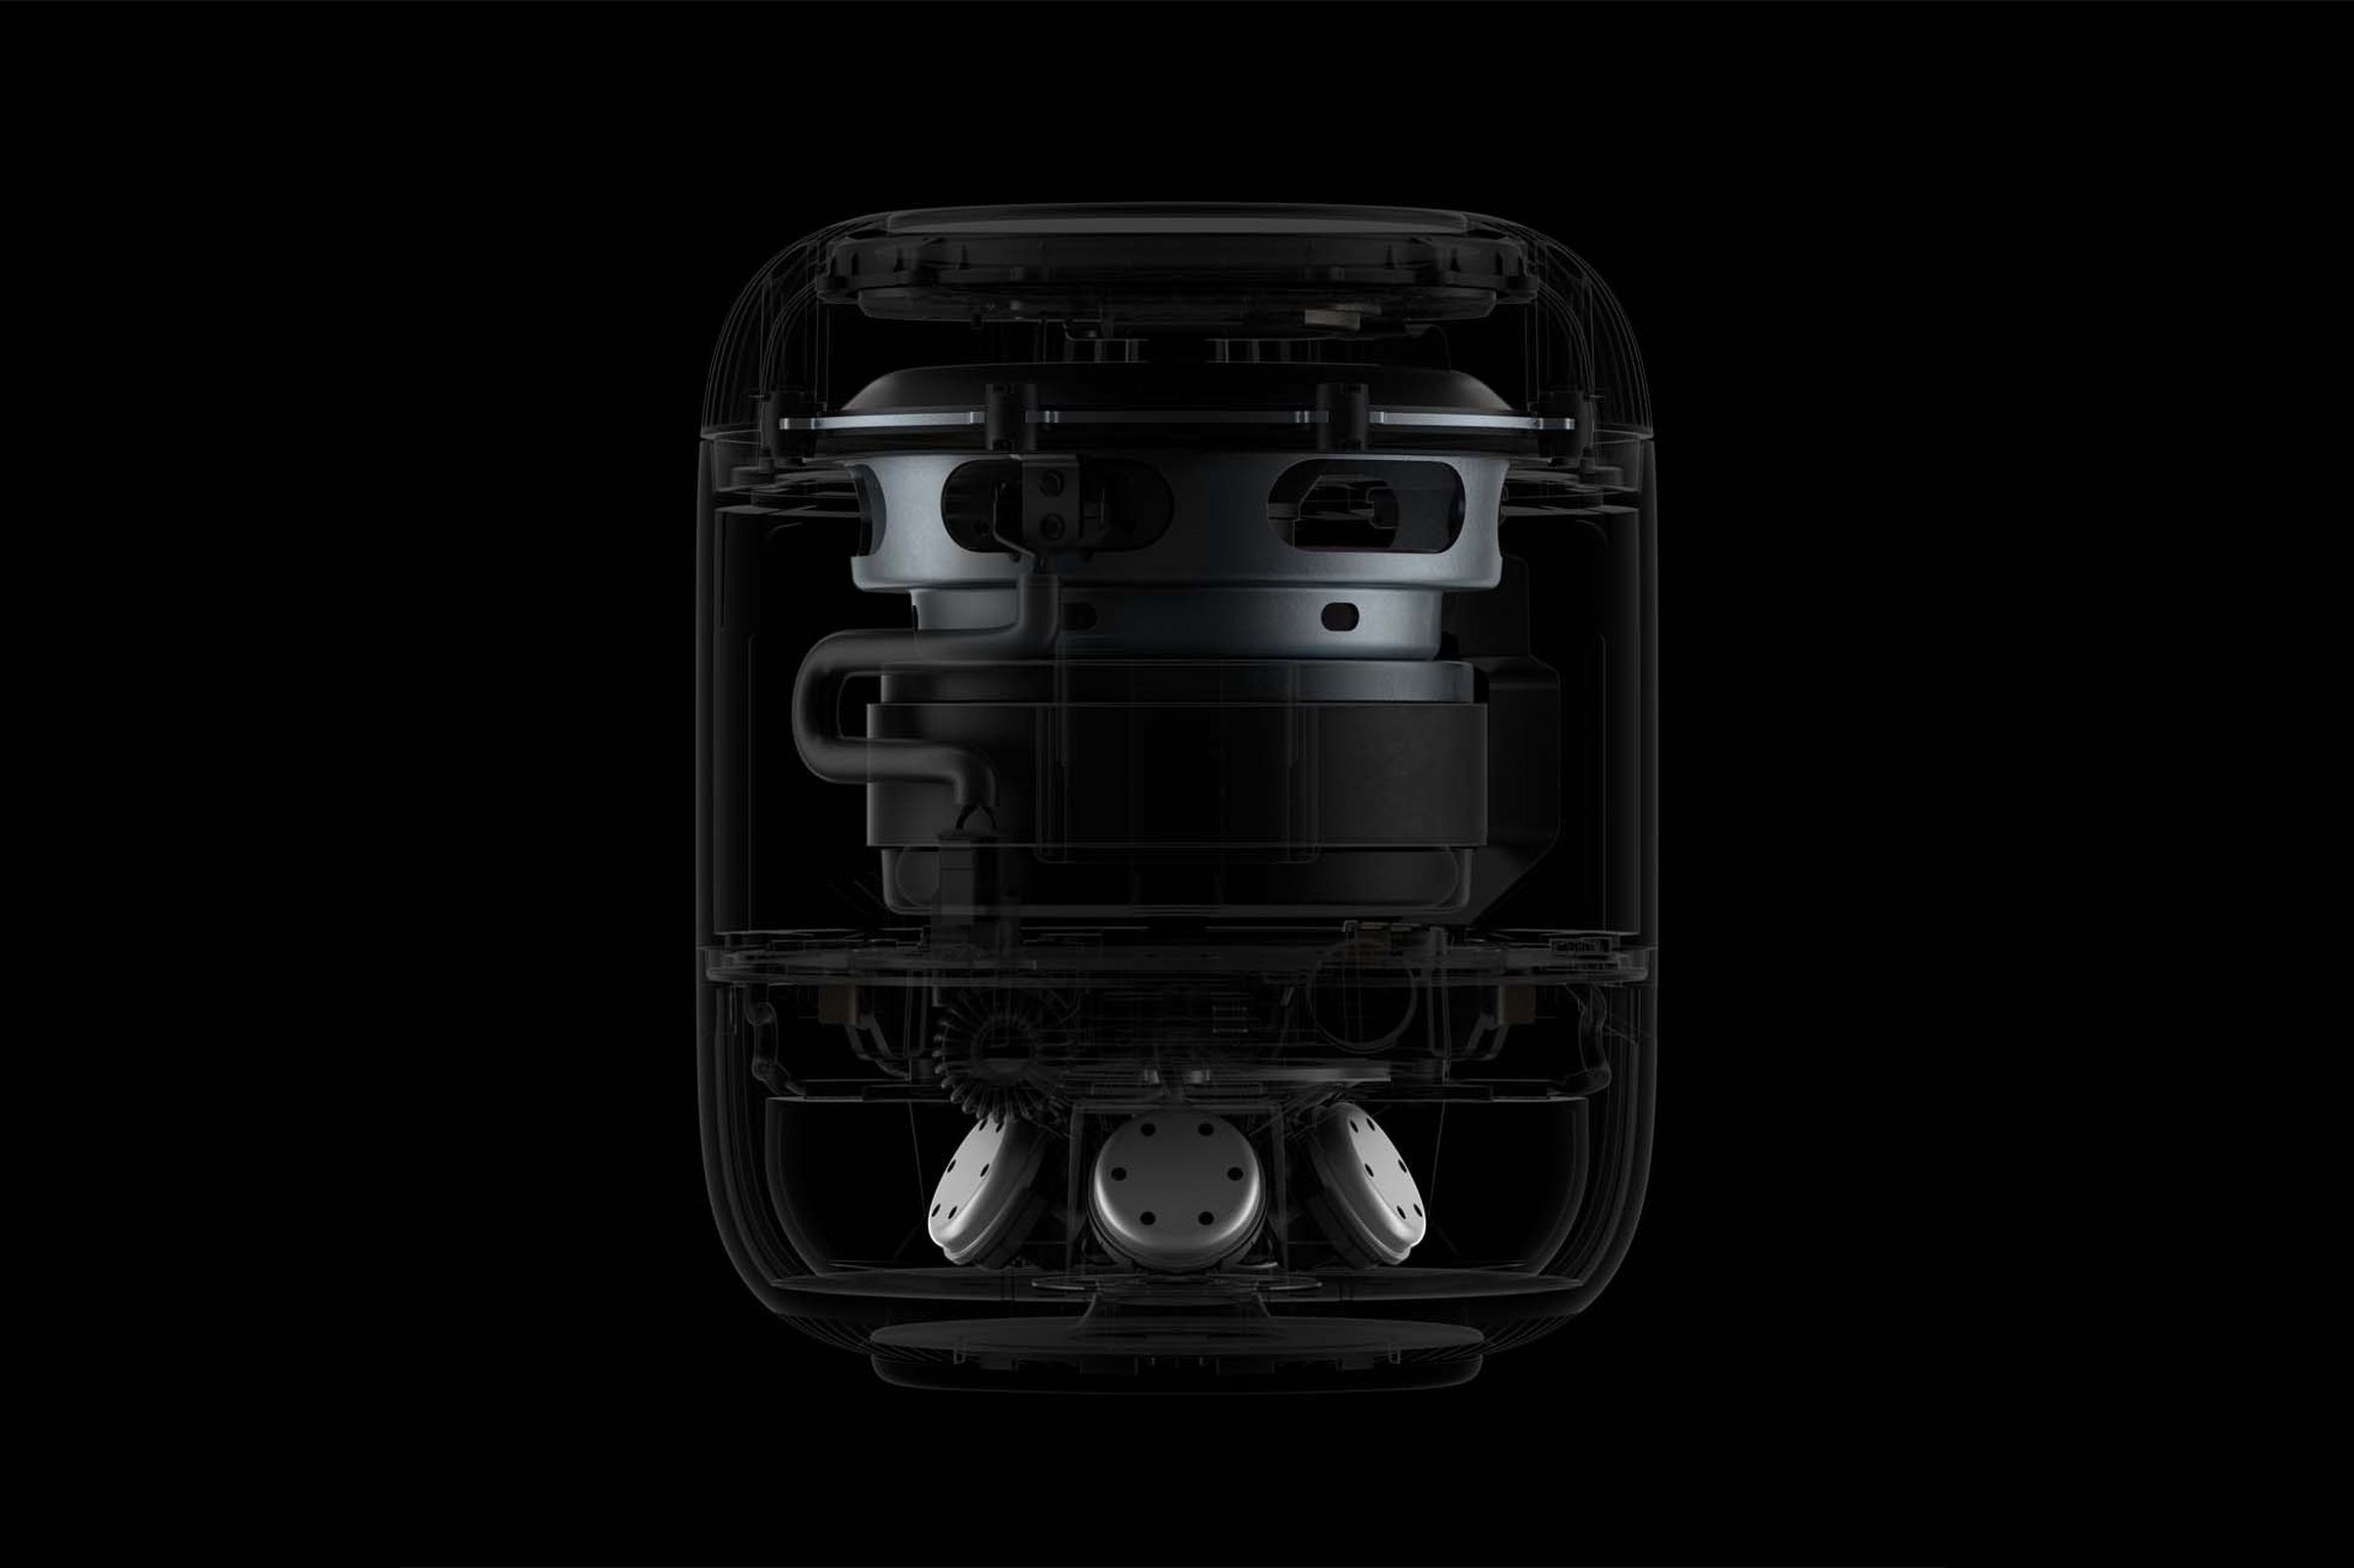 A cross section of the new HomePod.